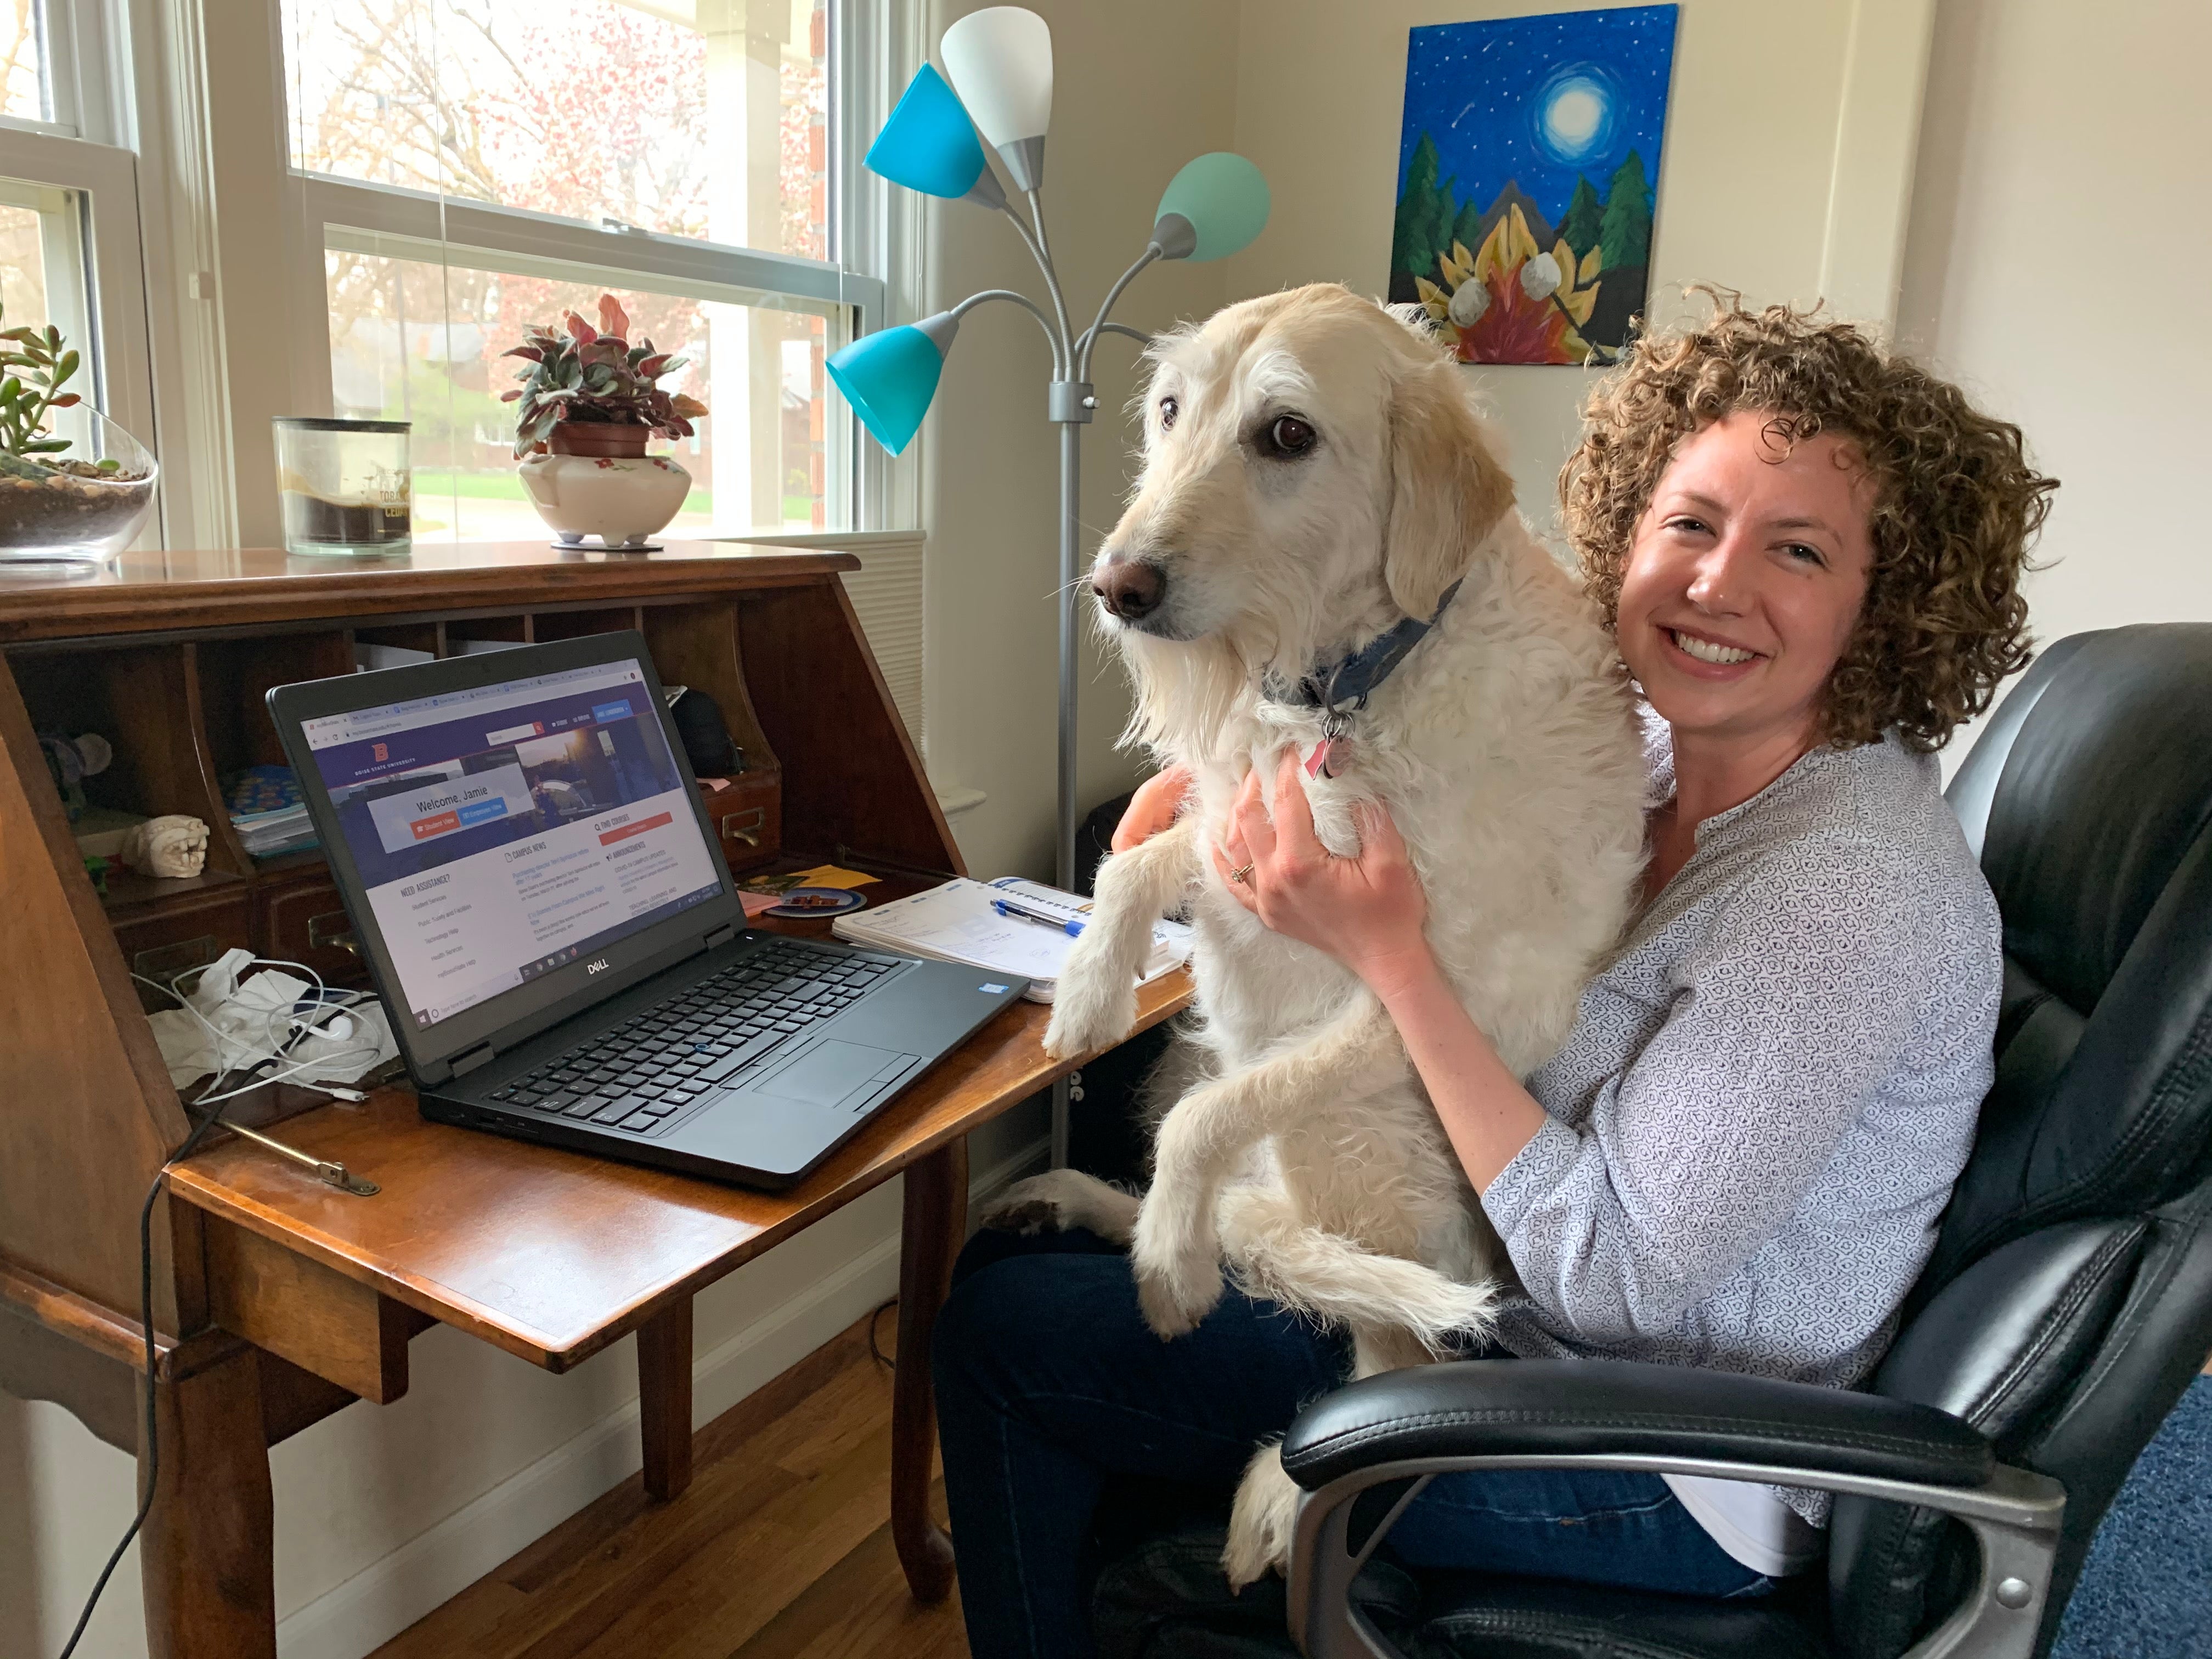 Jamie Lundergreen at her work-from-home desk with her dog, Wookiee, on her lap